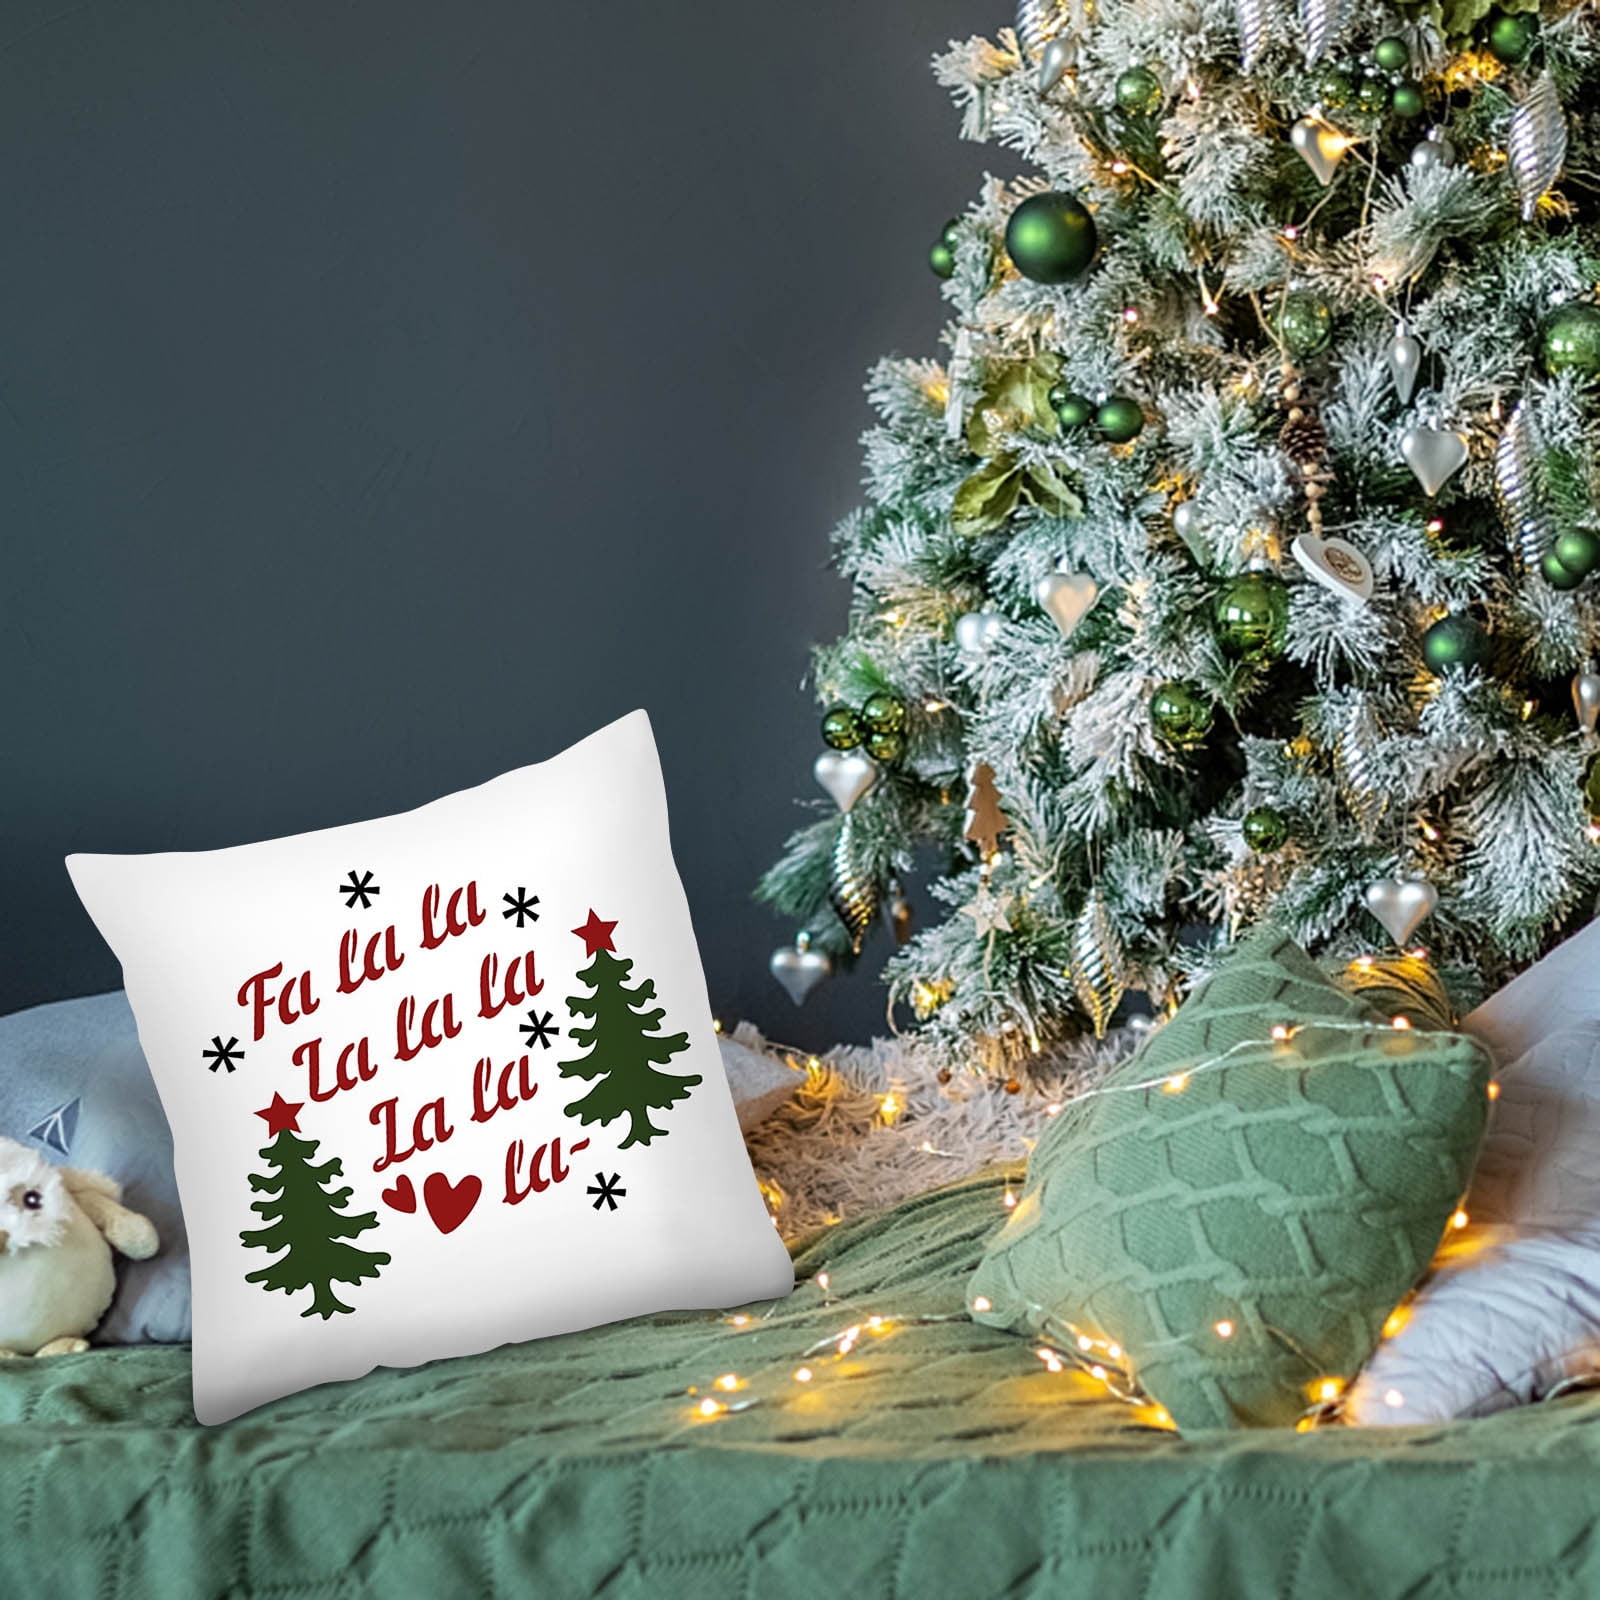 Cirzone Christmas Throw Pillow Covers Christmas Outdoor Pillow Covers Cotton Linen Christmas Pillow Covers 18x18 Christmas Decorations Set of 4 for